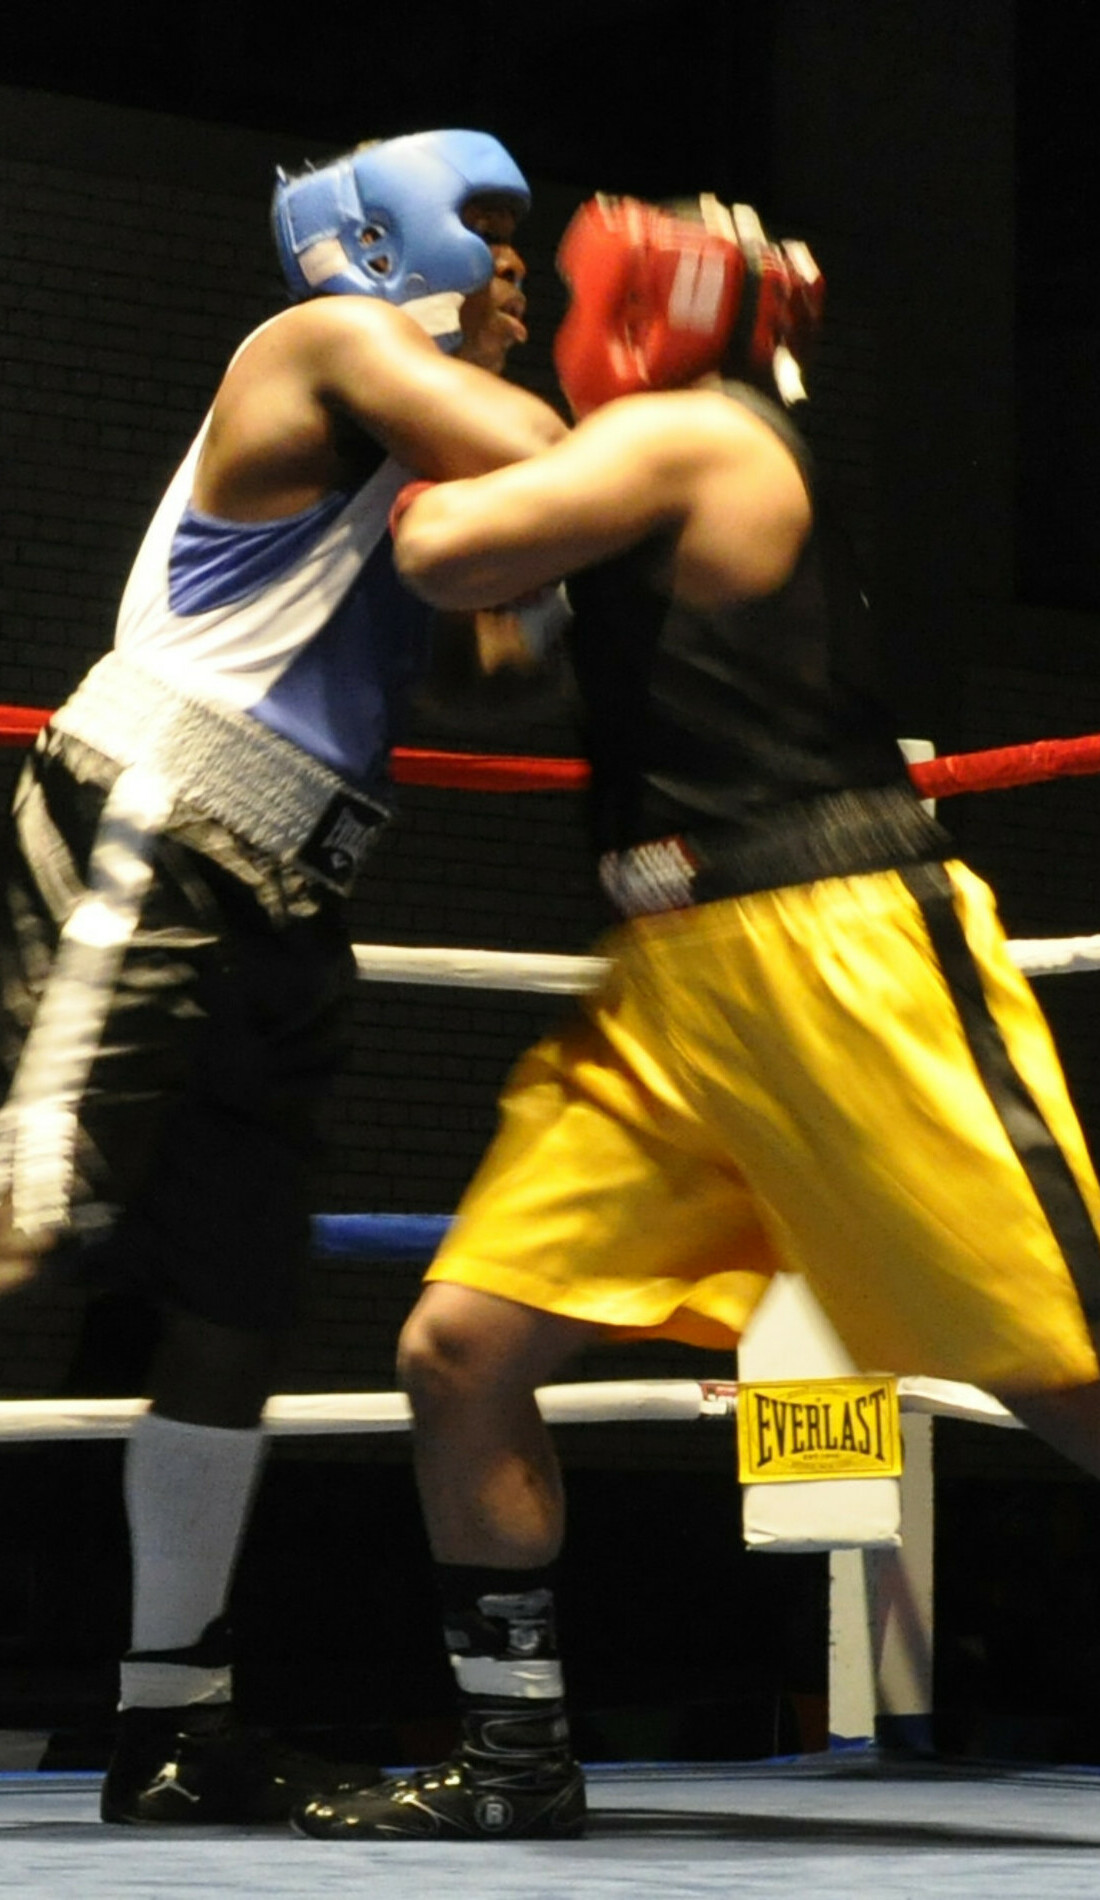 A Boxing live event